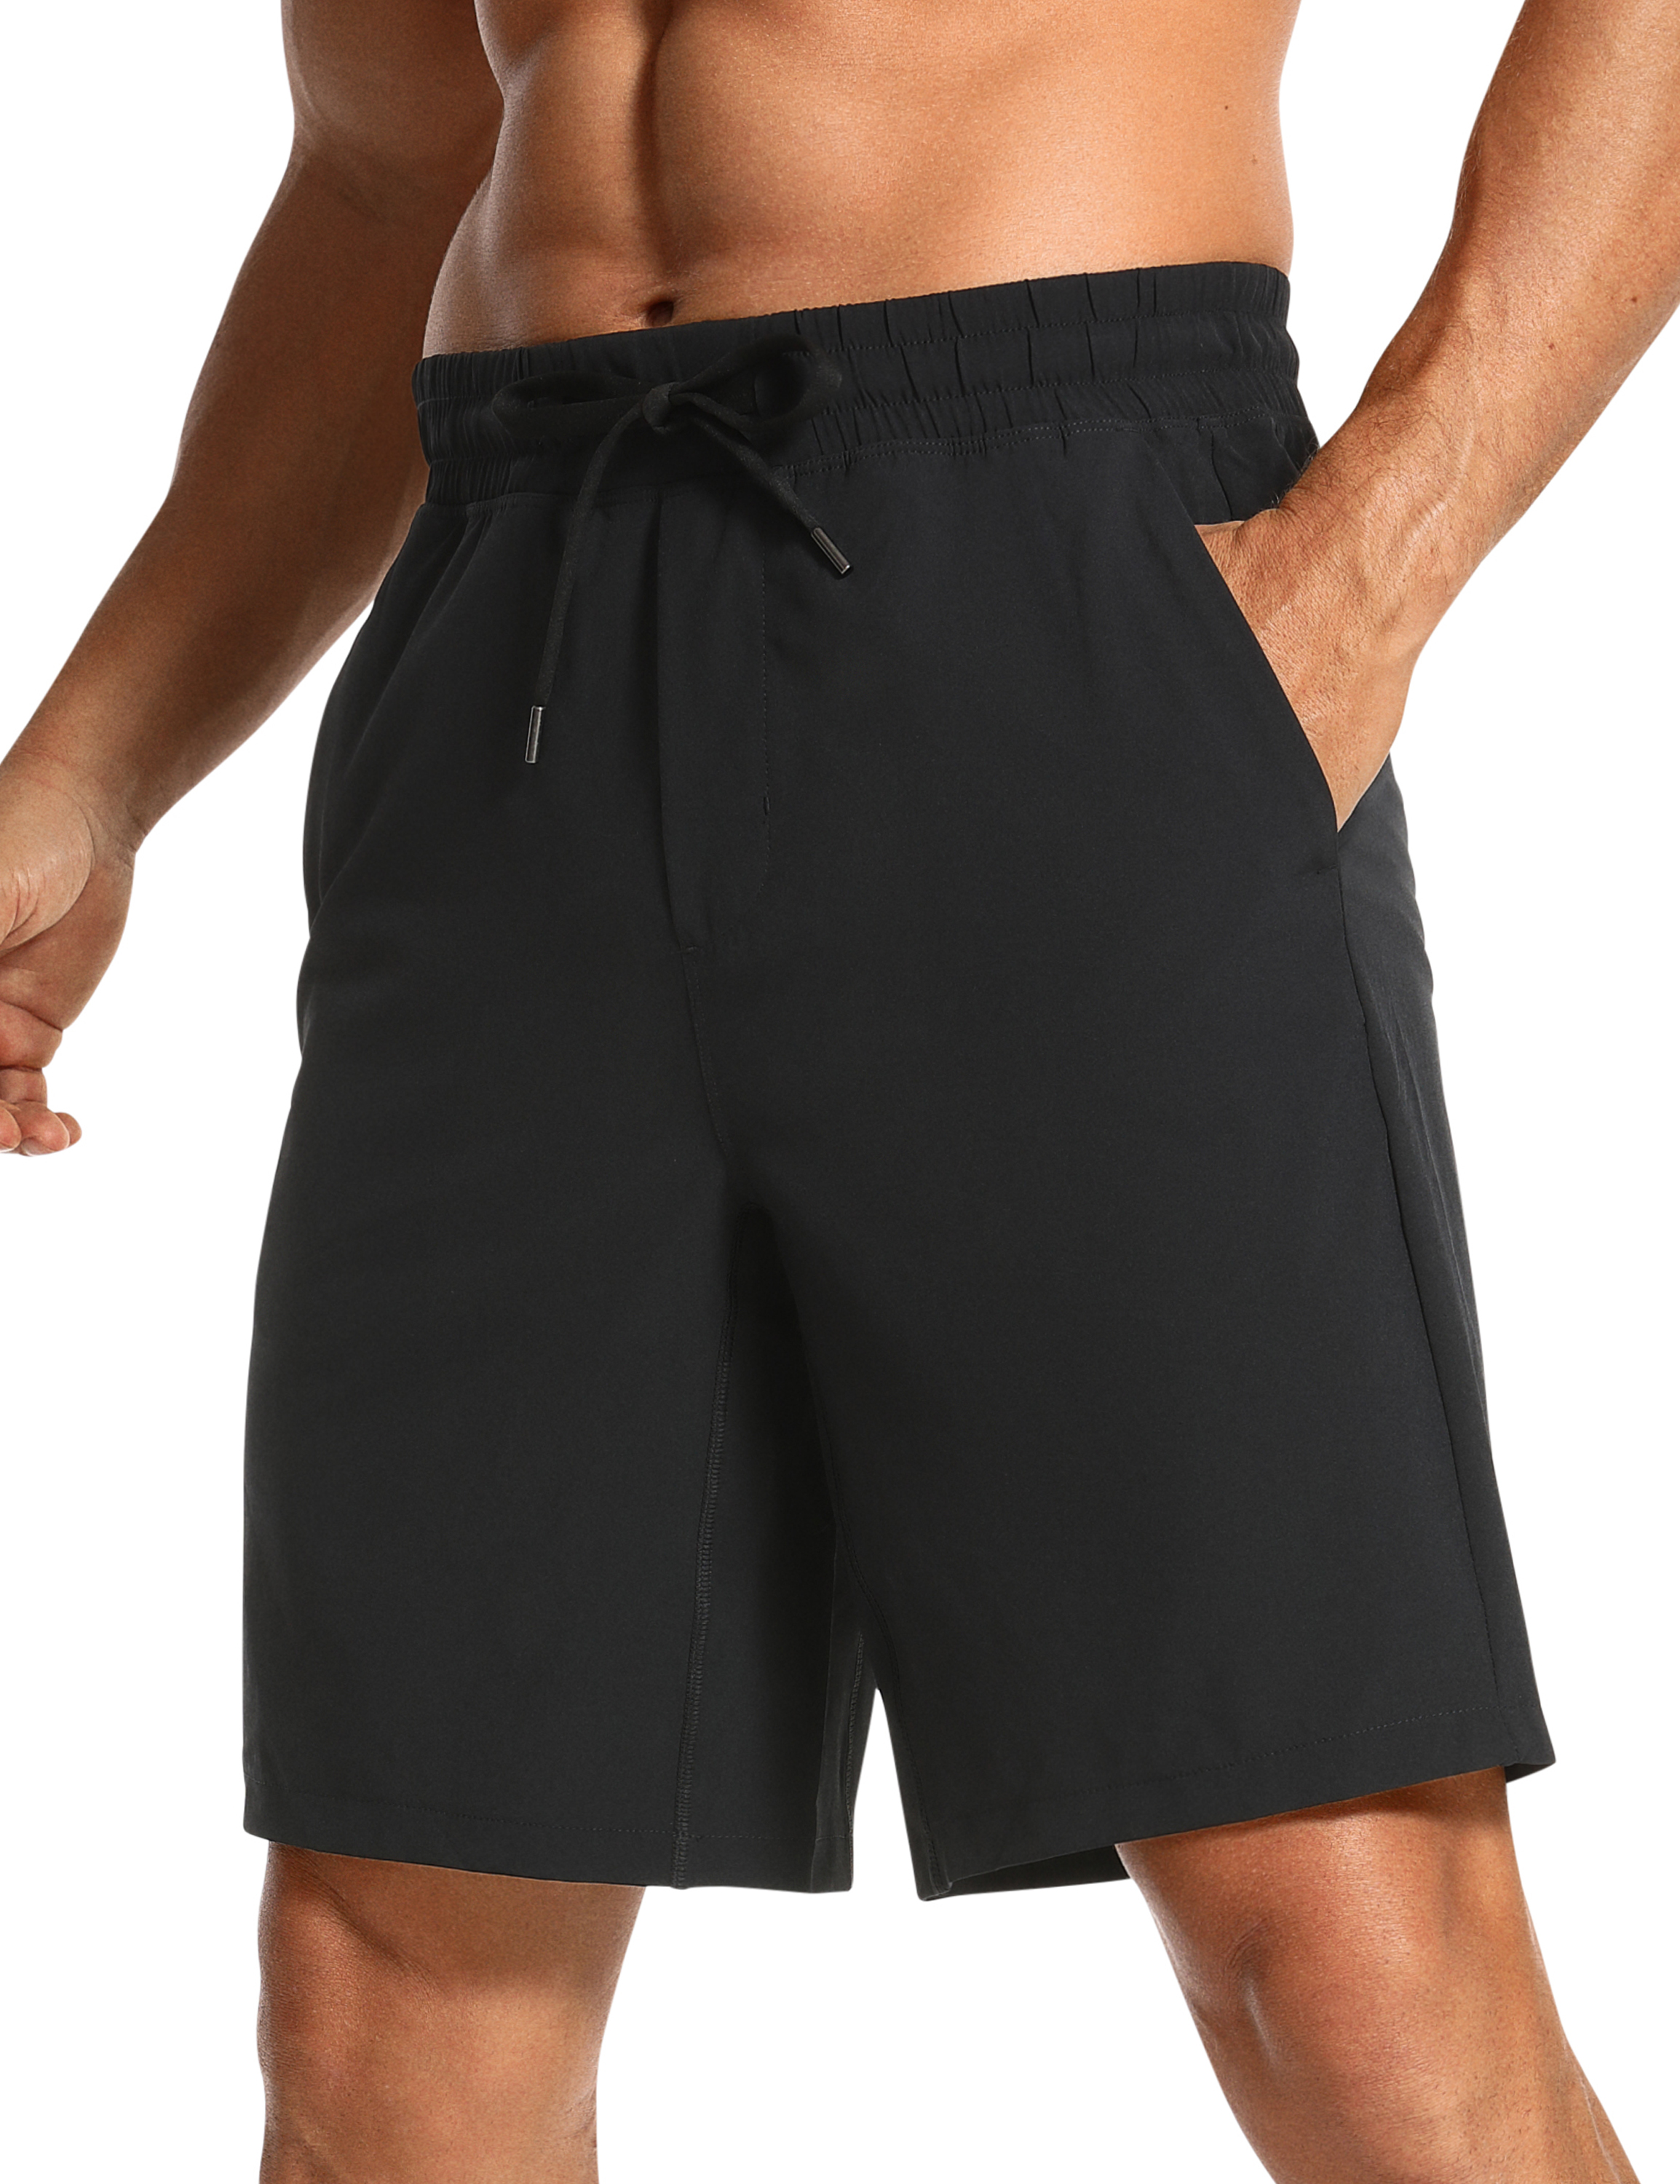 Shop the best of Feathery-Fit Athletic Shorts 9''- Linerless at